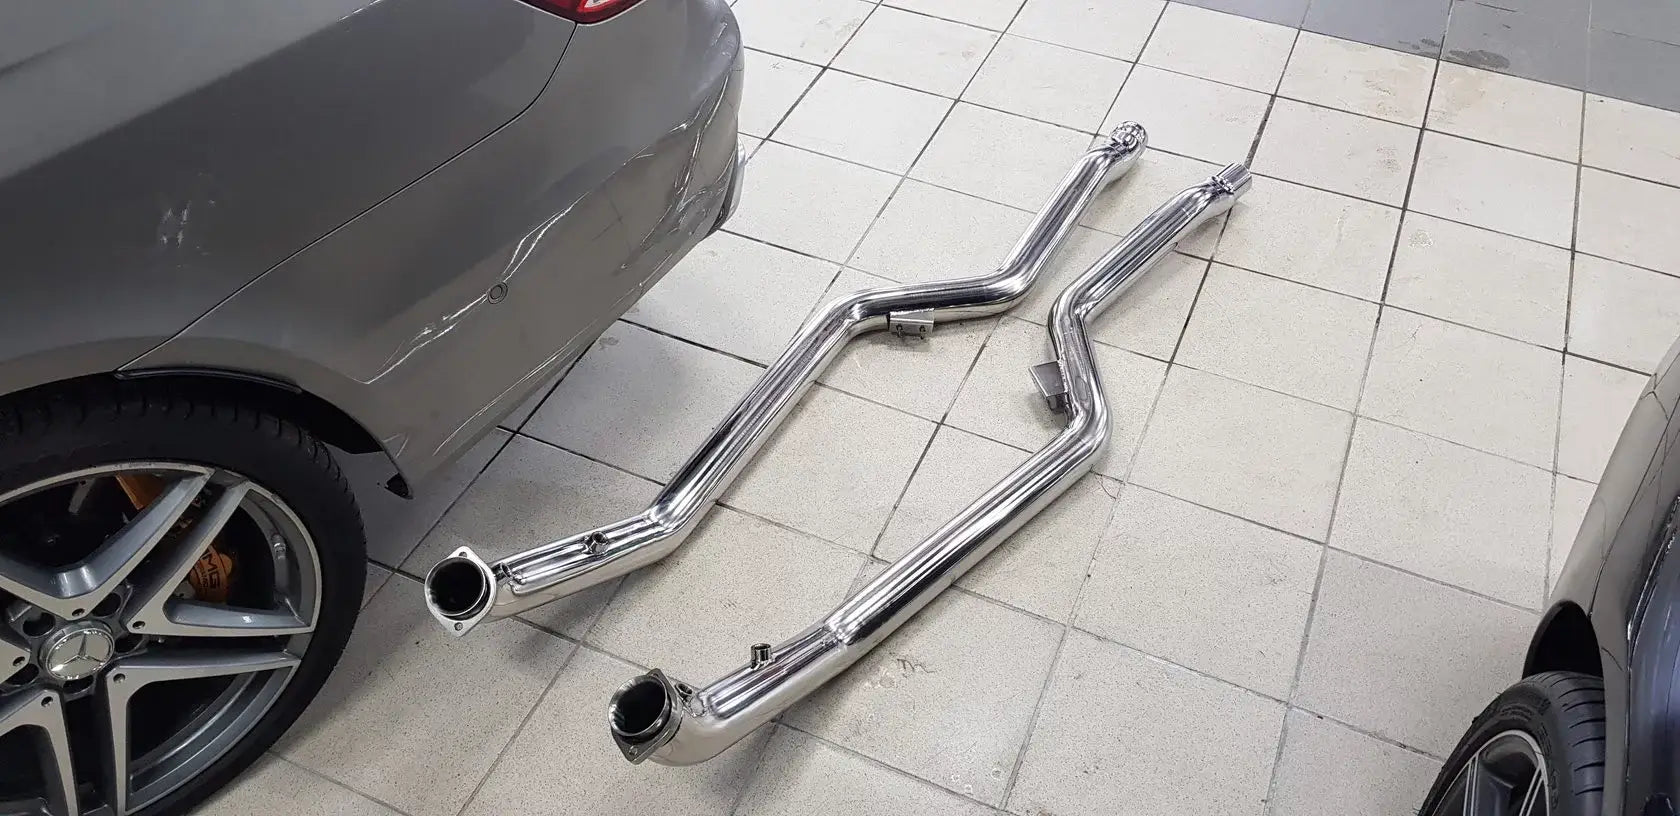 DEIKIN 10-MB.CLS63.W212-DP Downpipe for Mercedes-AMG CLS63 (w218) without HeatShield Photo-1 